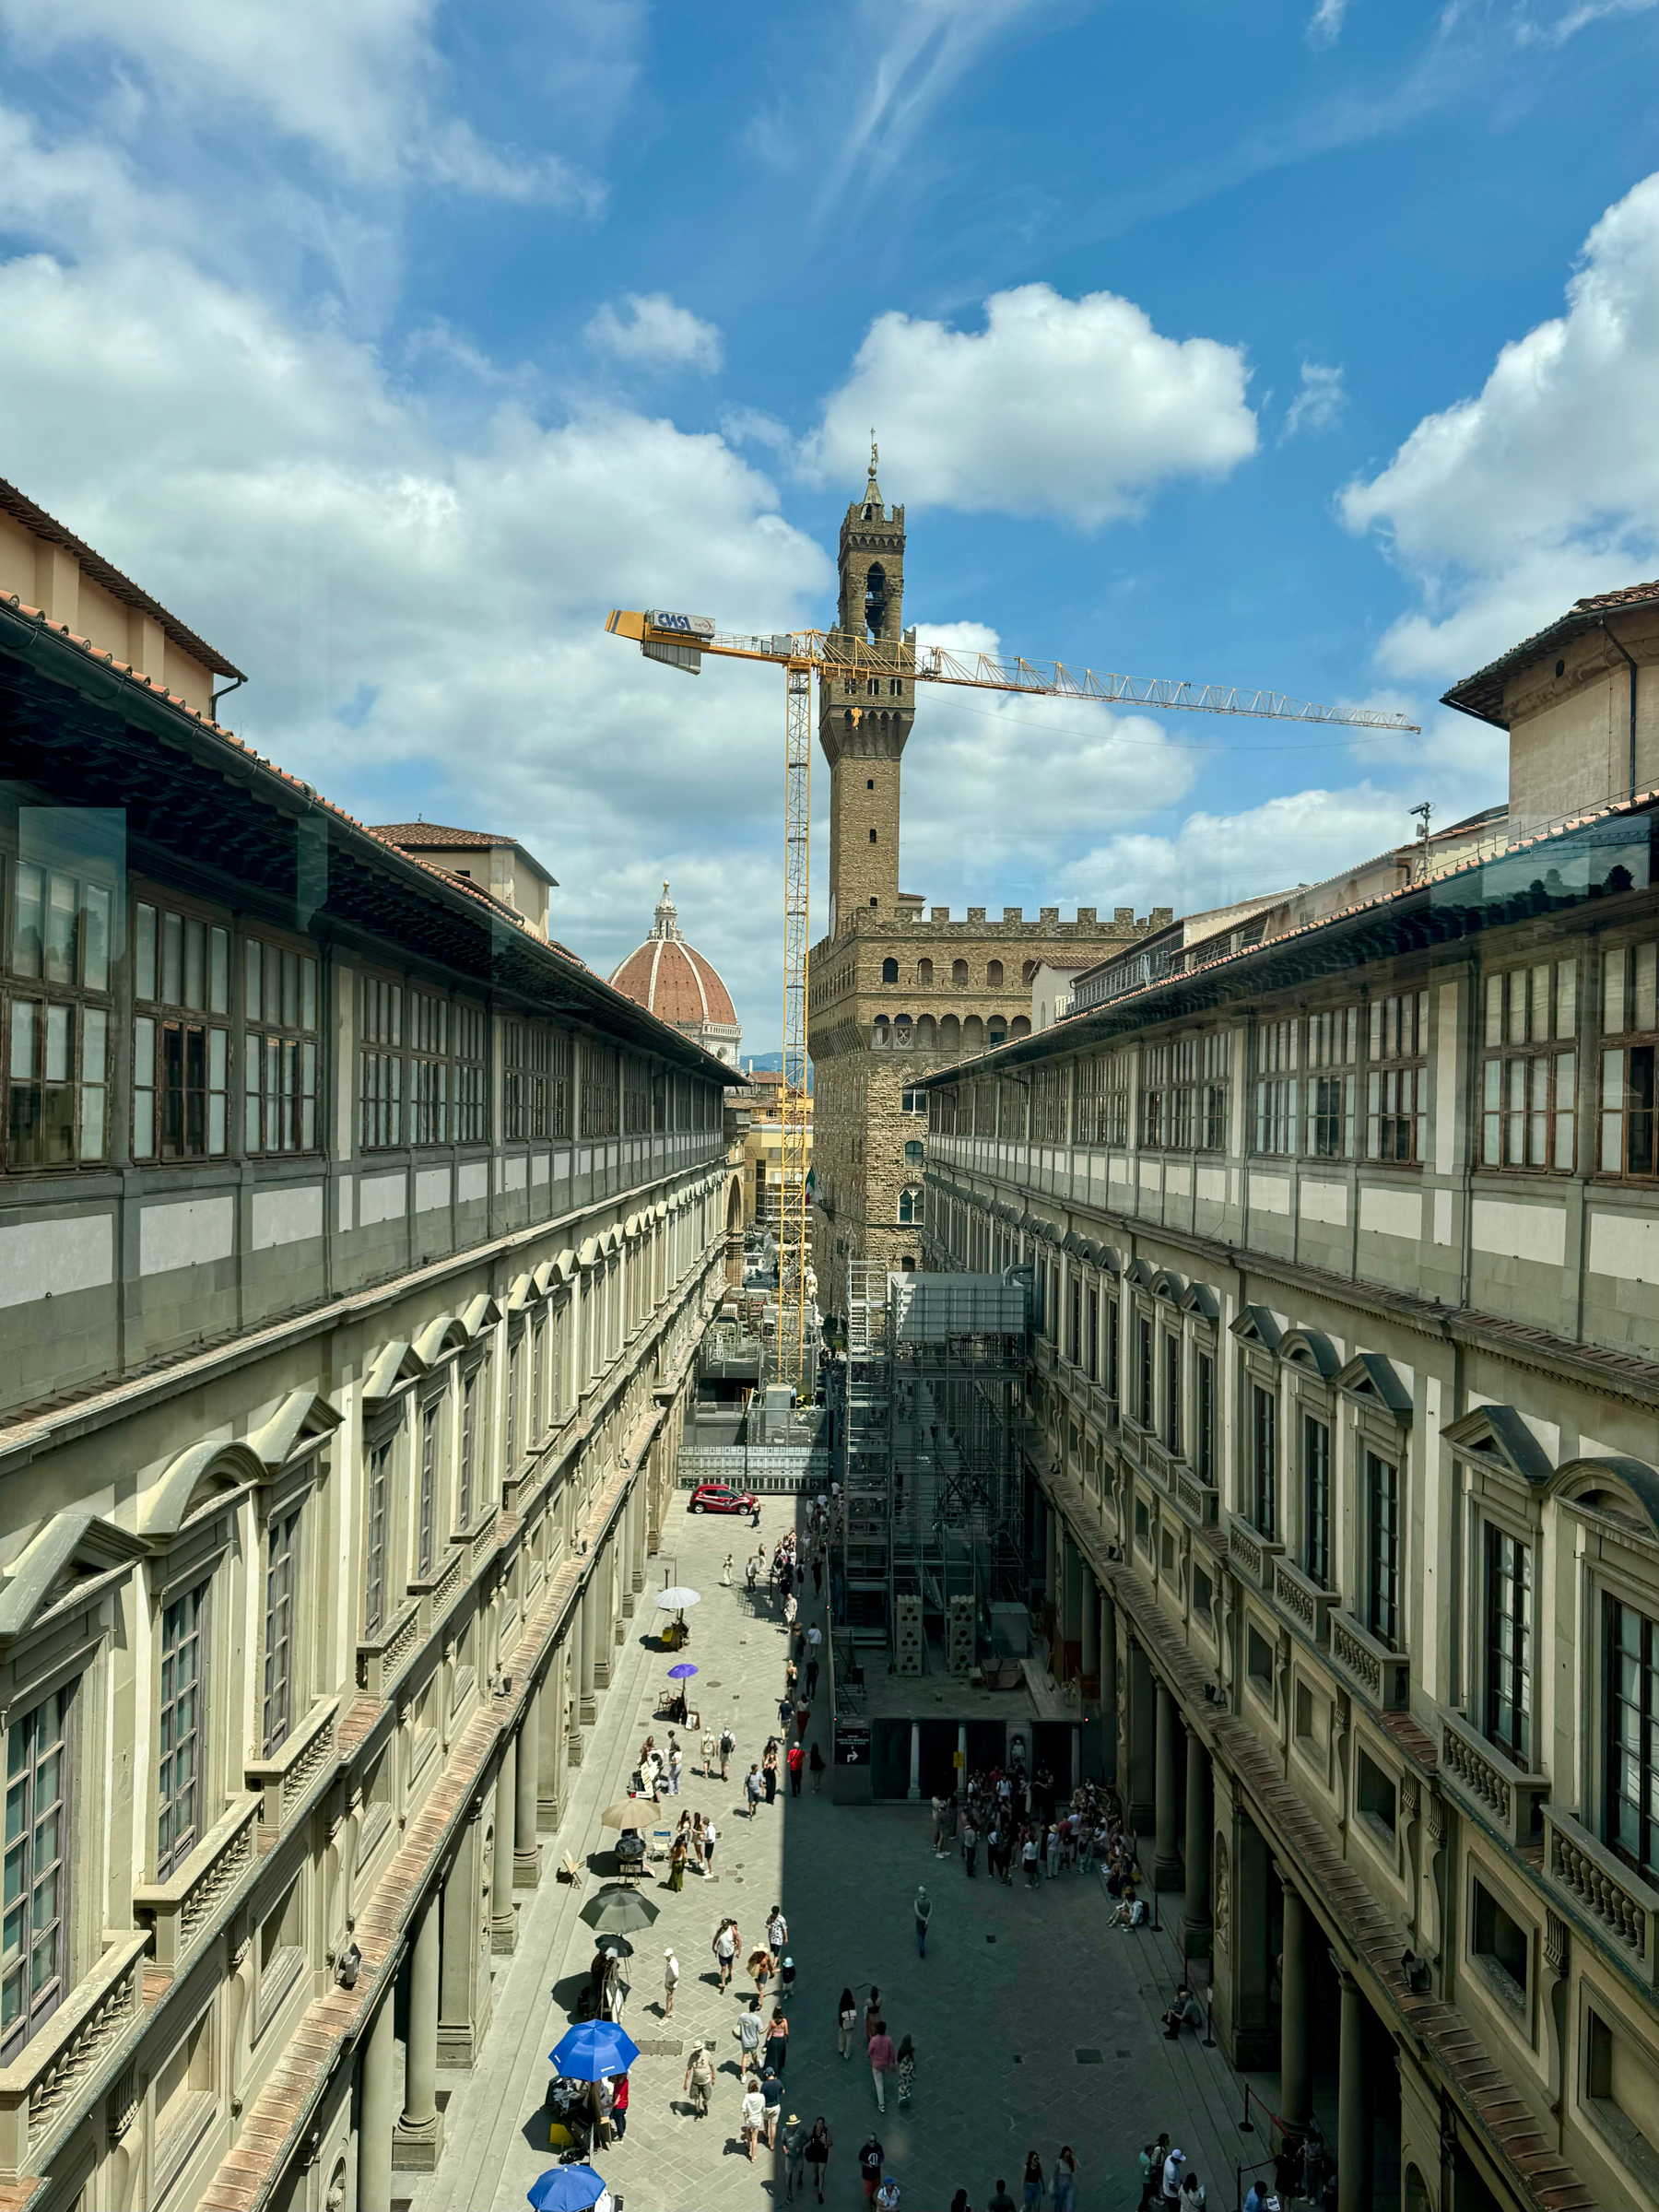 A view of the courtyard of the Uffizi Gallery in Florence, Italy. The street is crowded with people, some holding umbrellas for shade. A prominent bell tower and the dome of the Florence Cathedral can be seen in the background. 